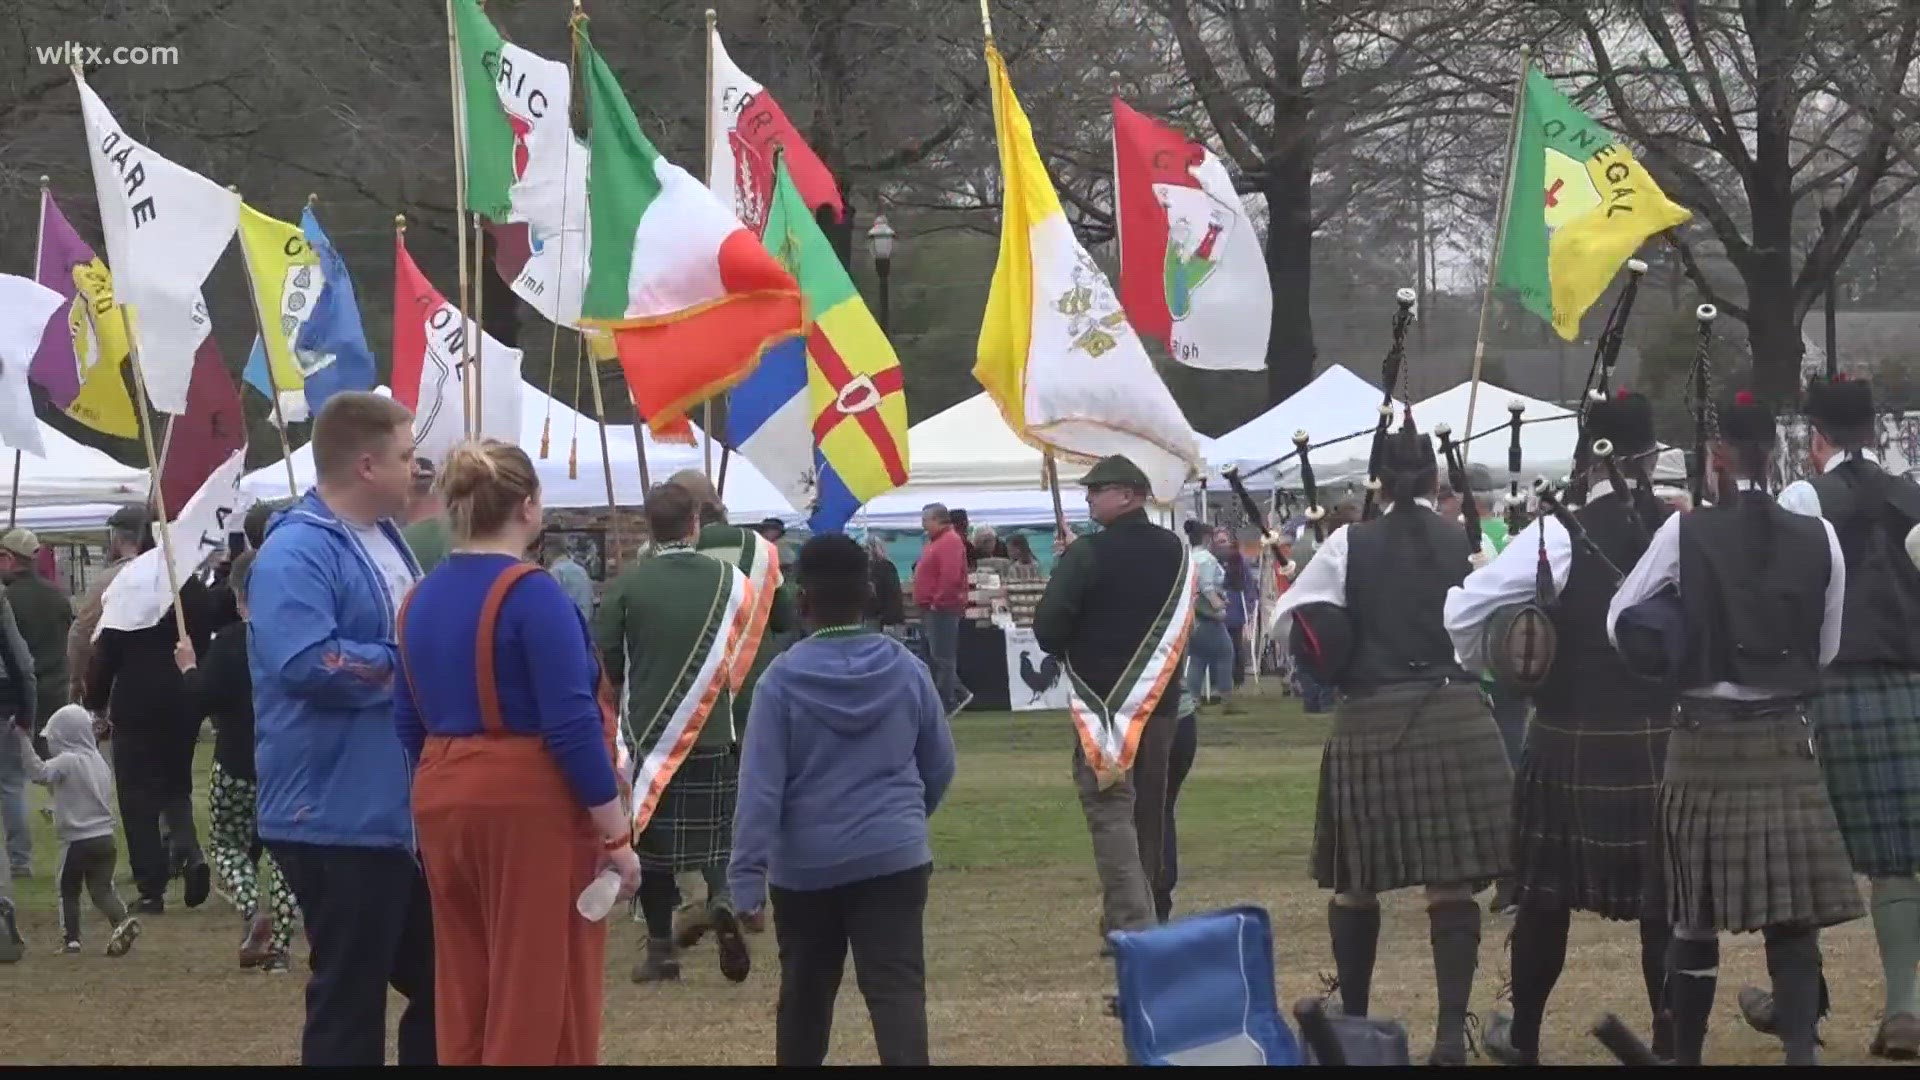 The event began as a way to celebrate local Irish ties and has grown to one of the biggest in the Southeast, organizers say.